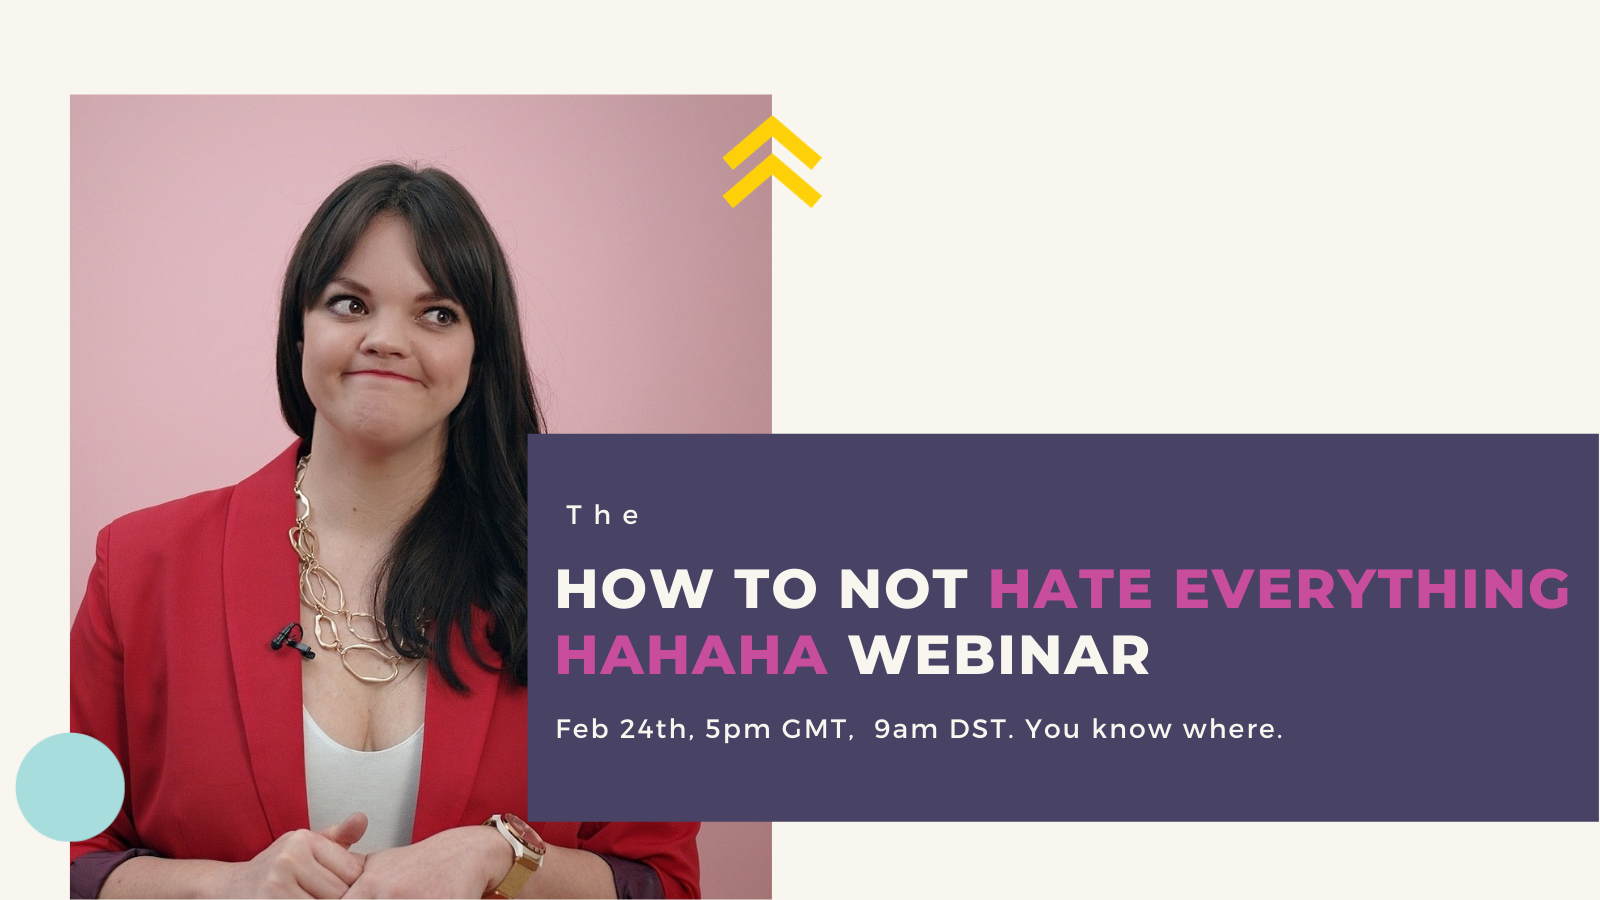 The HOW TO NOT HATE EVERYTHING HAHAHA webinar